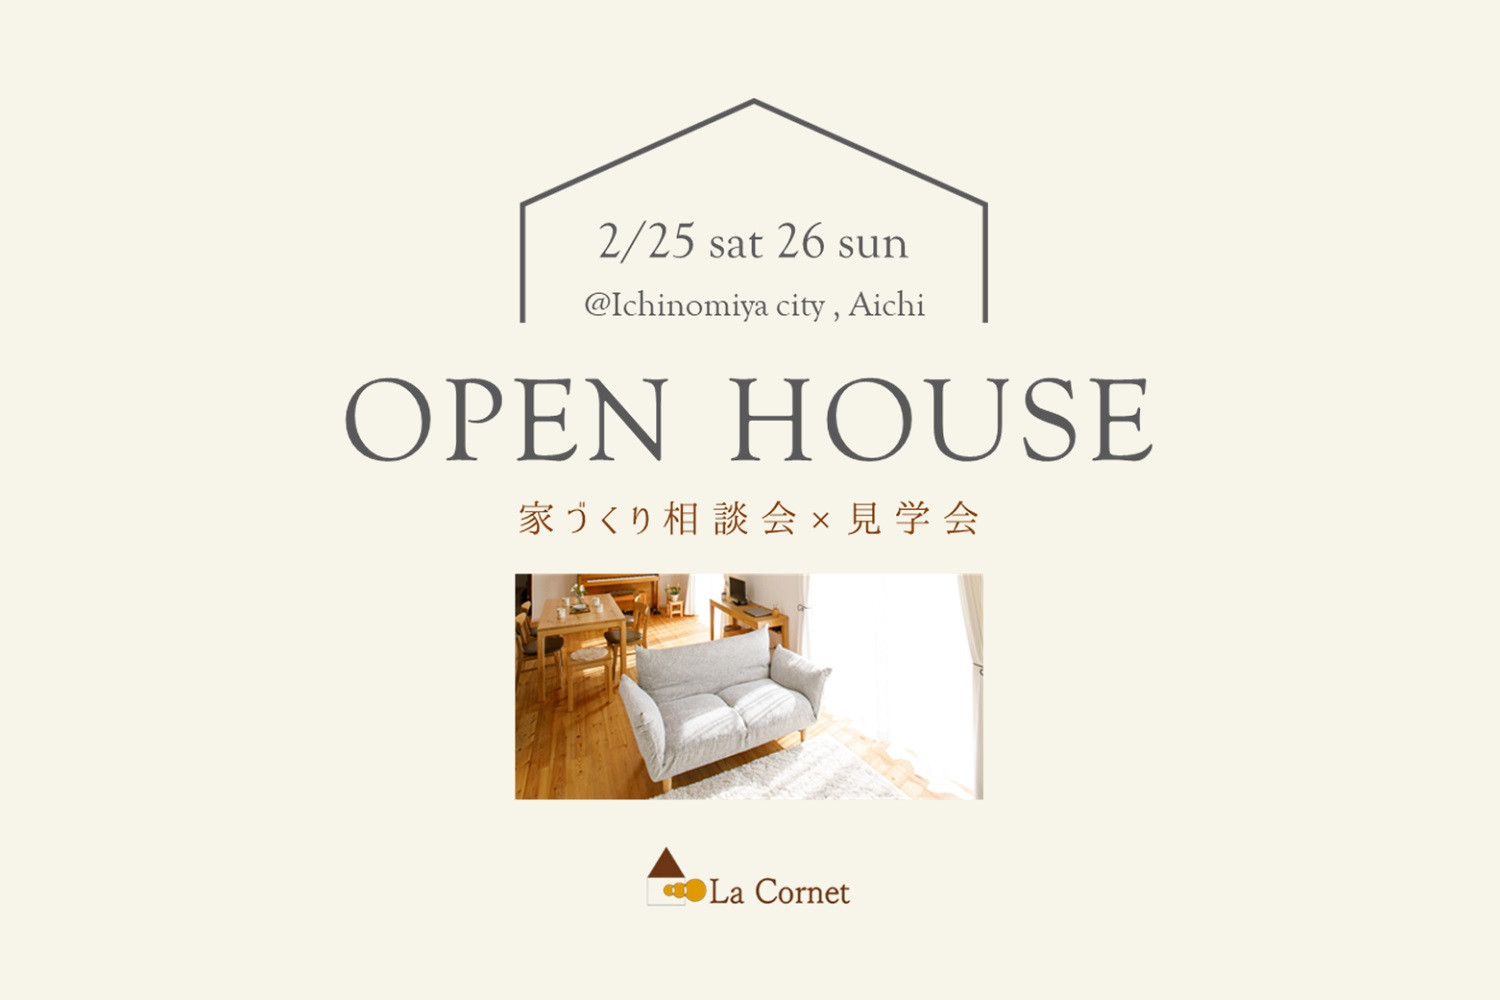 OPEN HOUSE 家づくり相談会×見学会